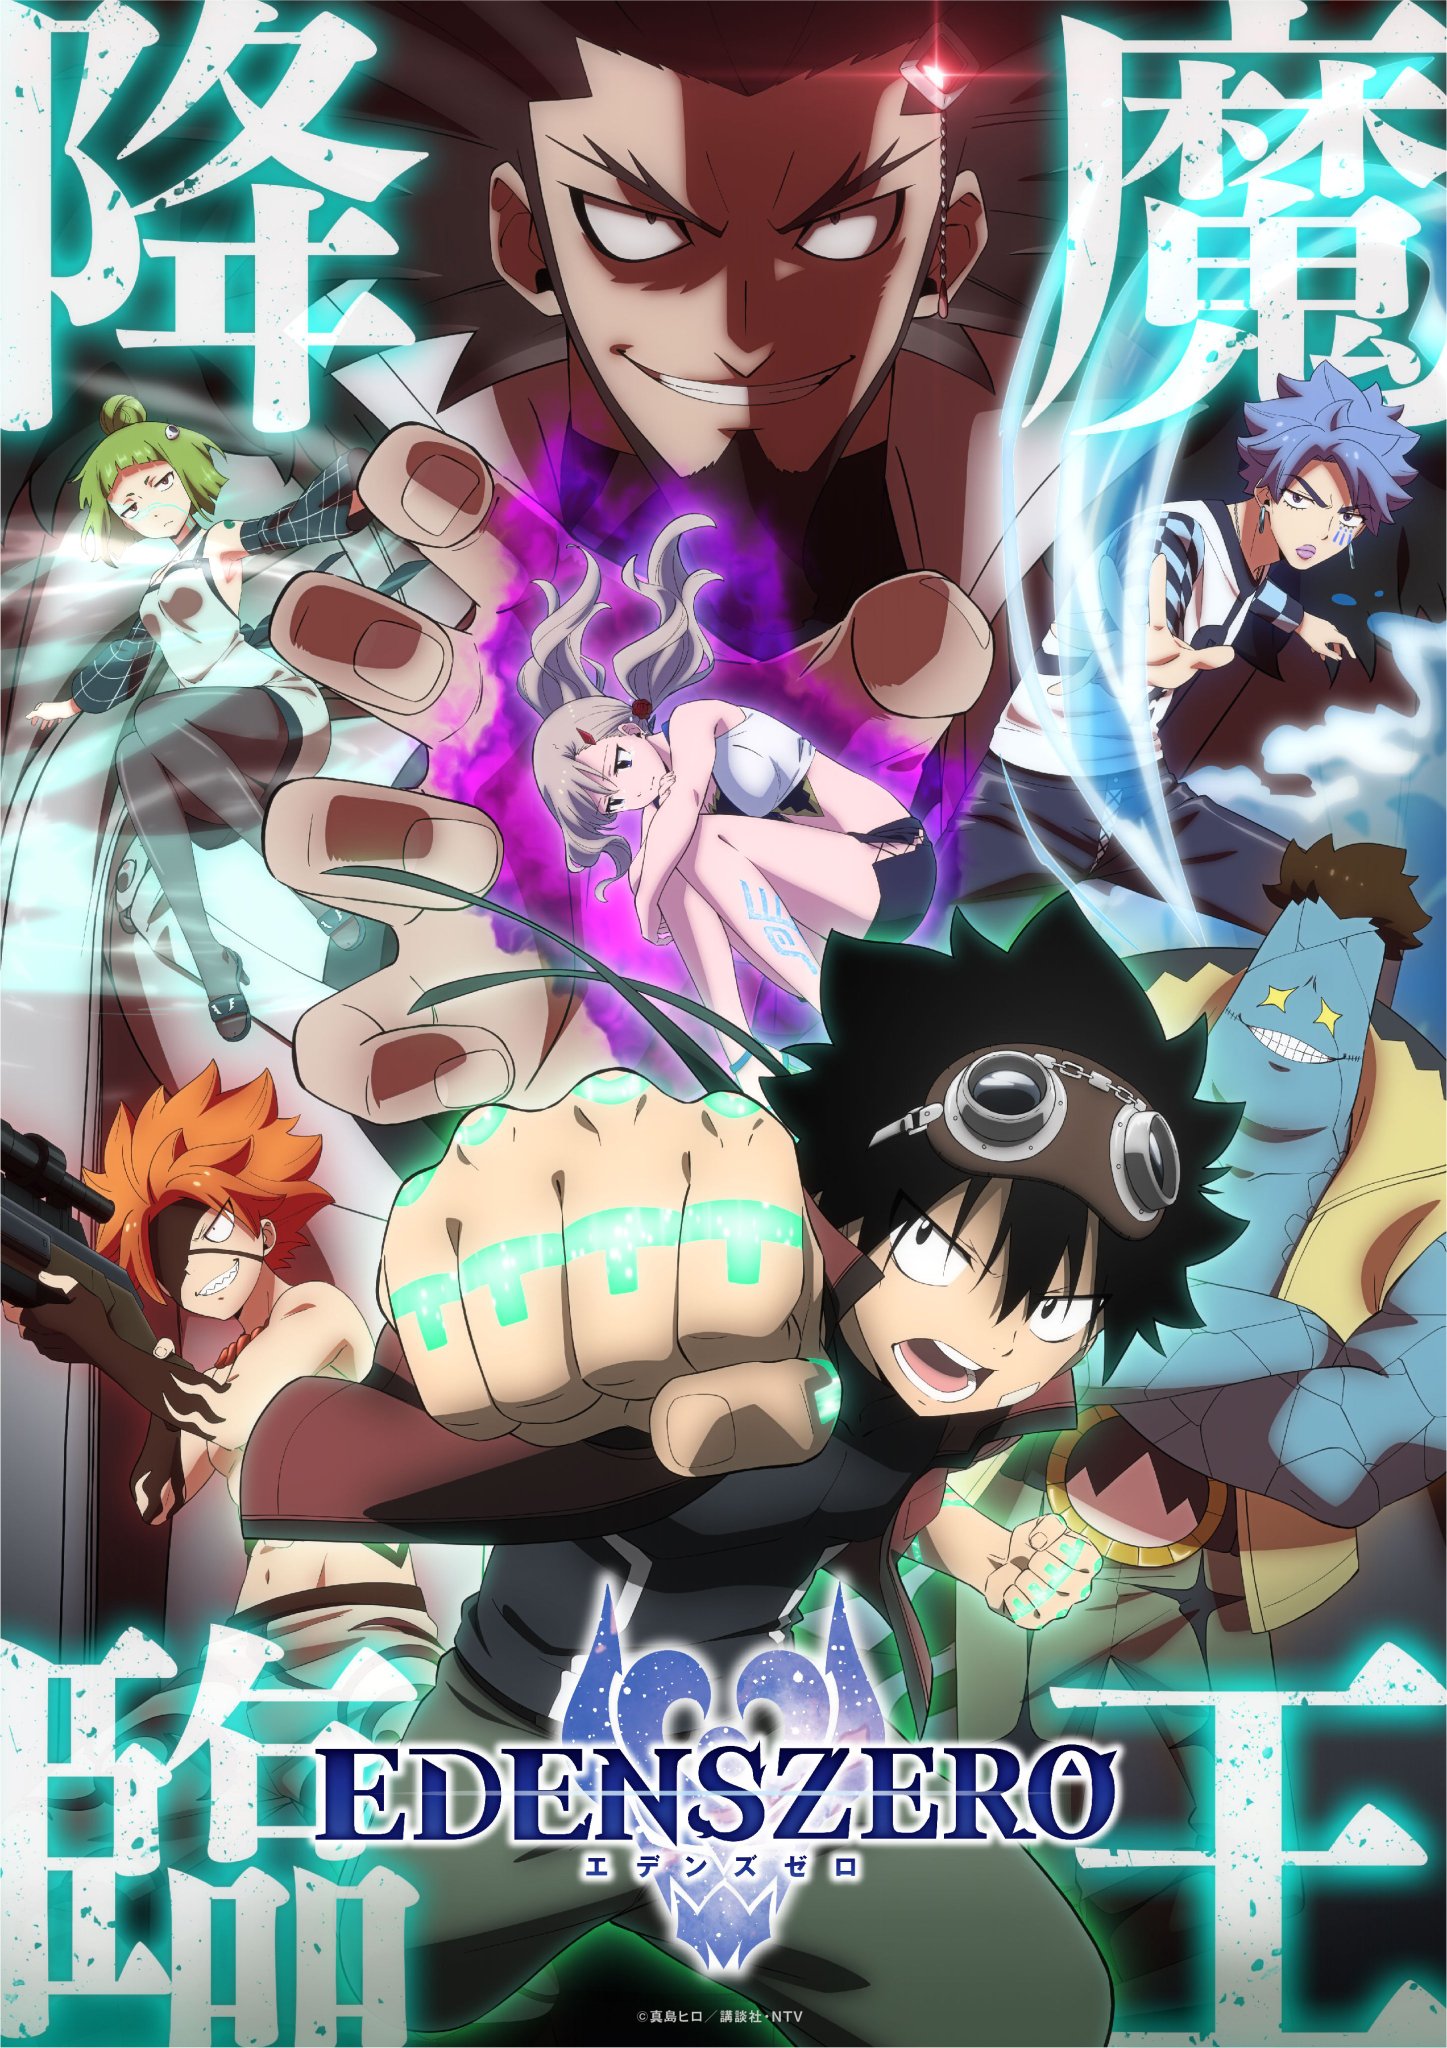 Edens Zero Season 2 Episode 21 Preview Images and Staff Revealed